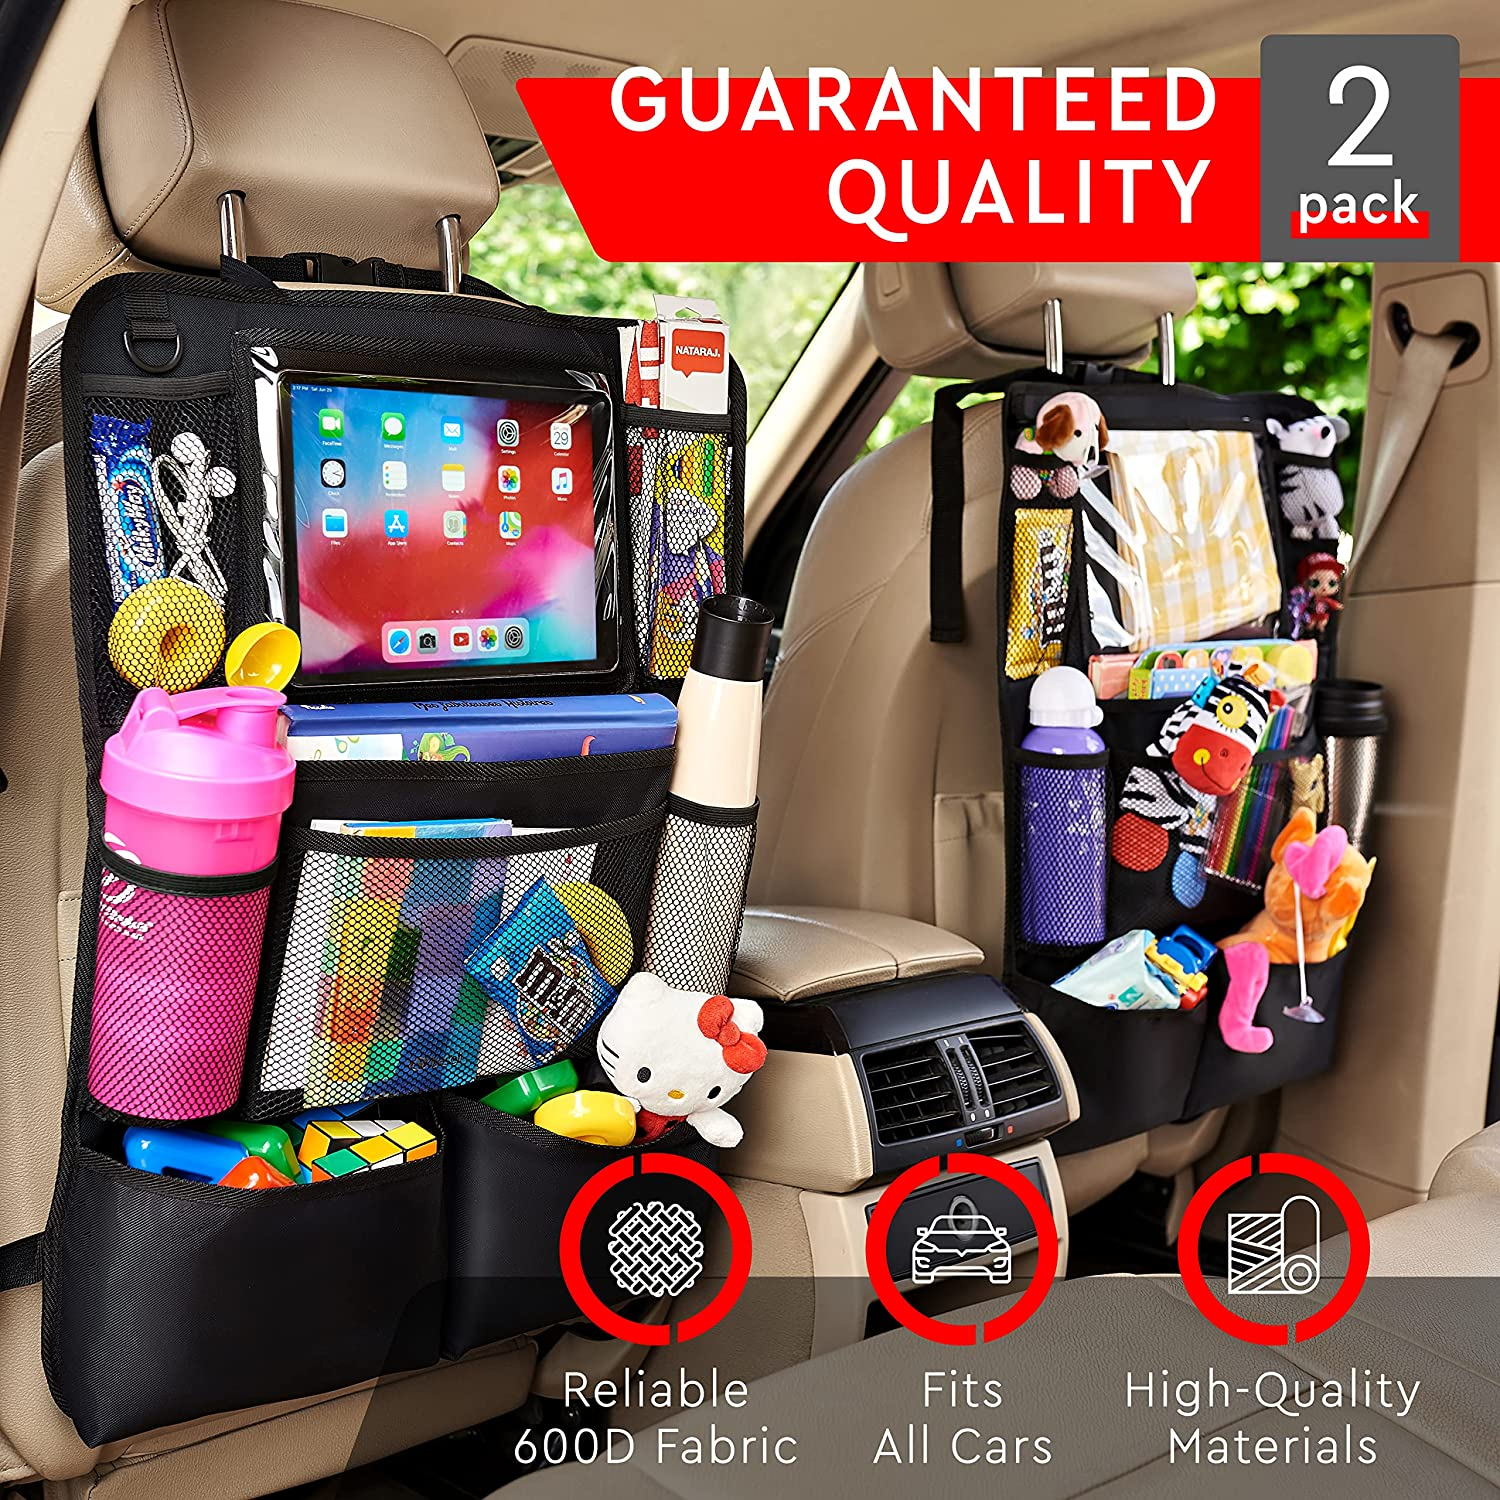 Backseat Car Organizer, Kick Mats Back Seat Protector with Touch Screen Tablet Holder, Car Back Seat Organizer for Kids, Car Travel Accessories, Kick Mat with 9 Storage Pockets 2 Pack